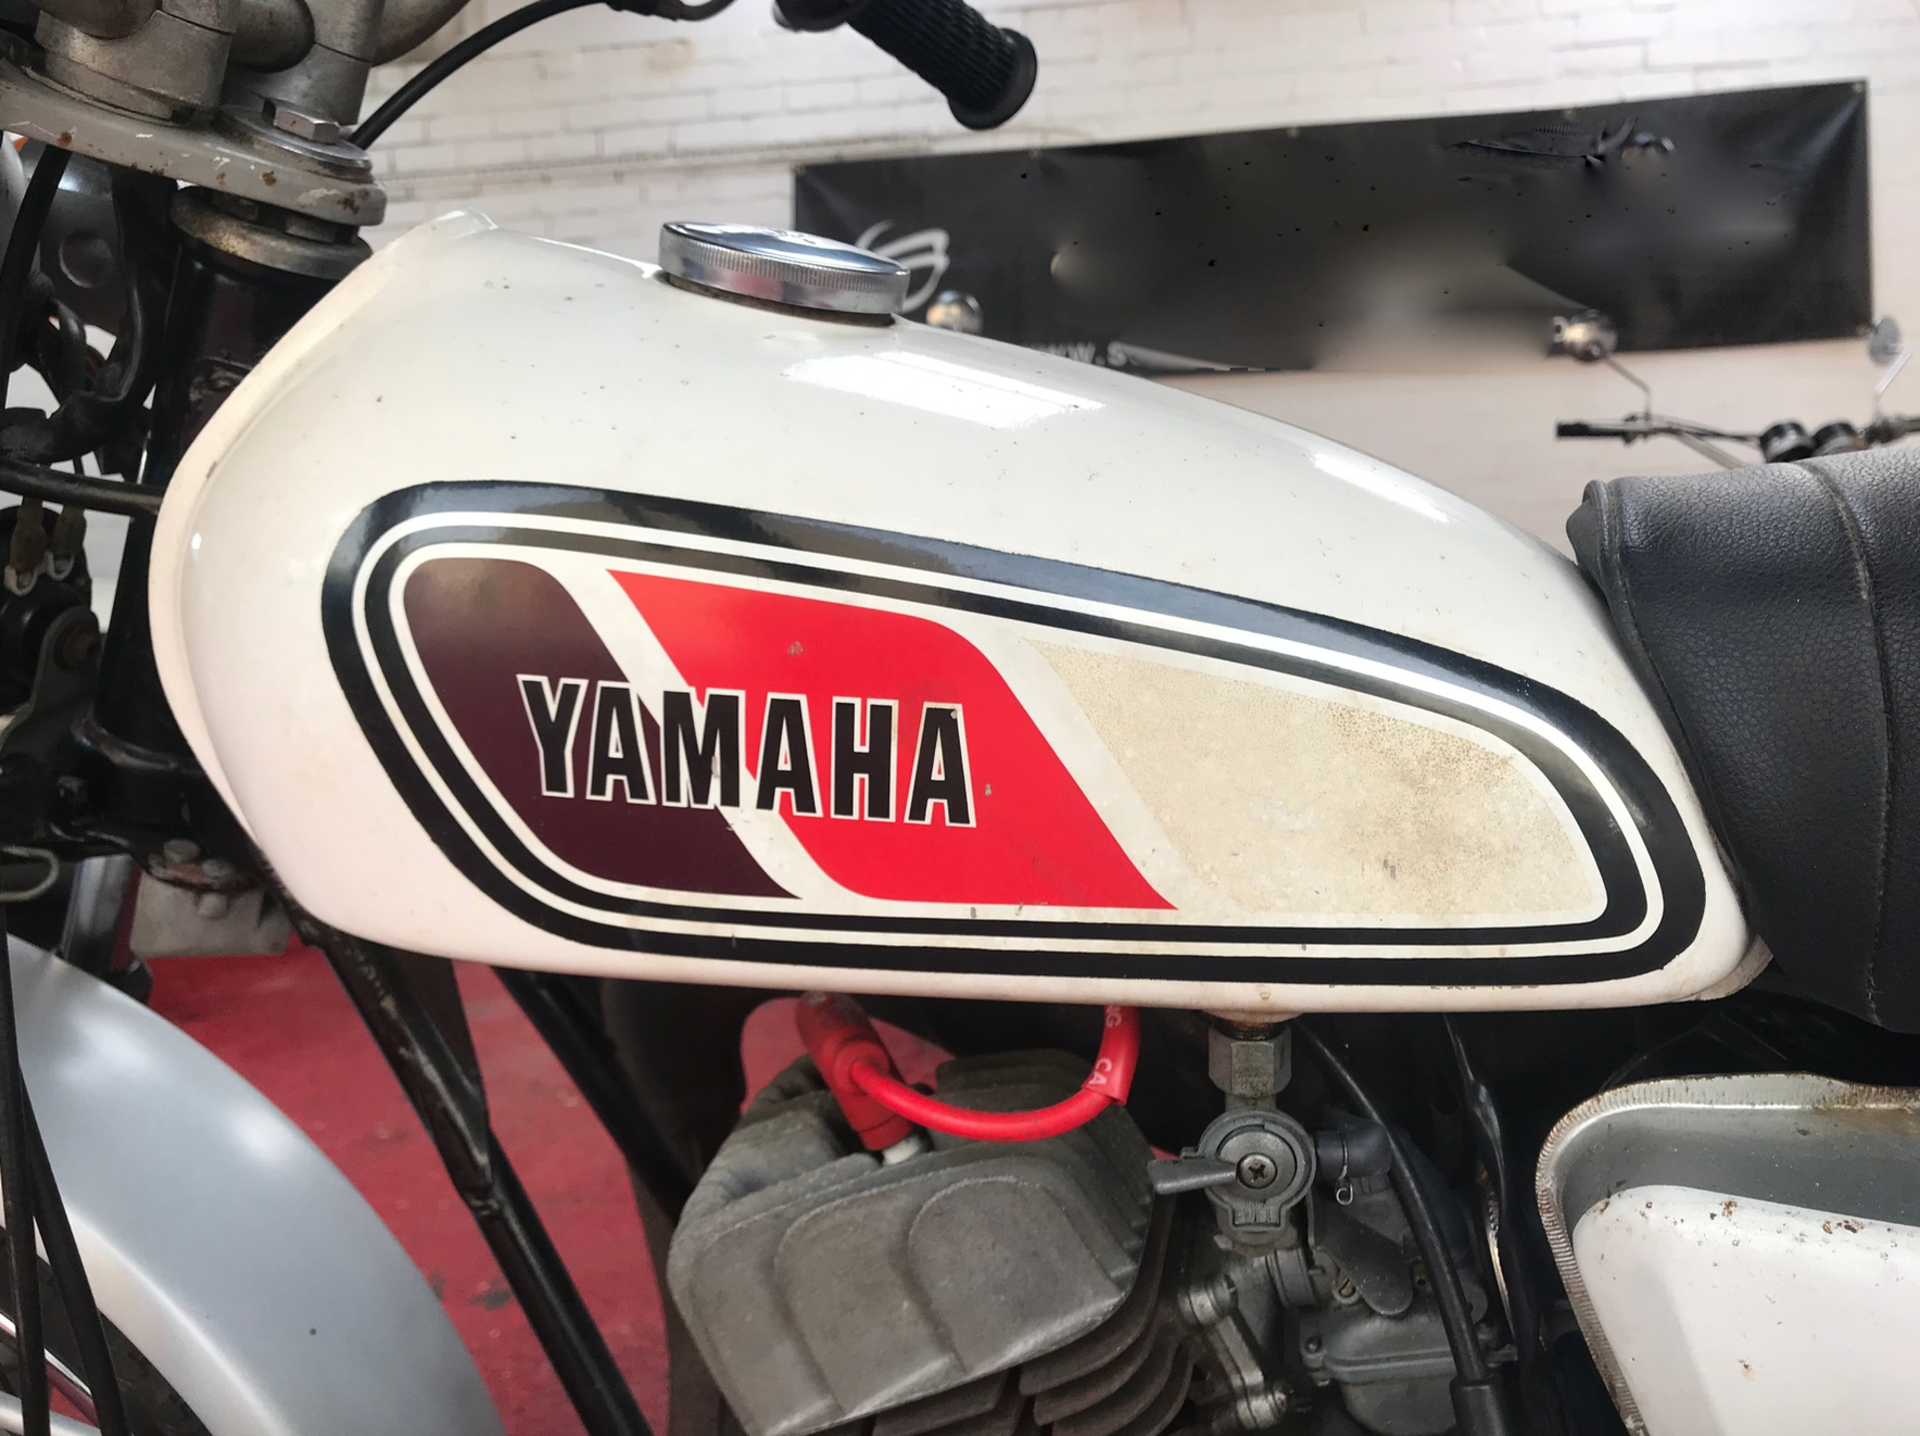 1977 Yamaha GT50 Mini Trail In Original Condition - Image 12 of 22